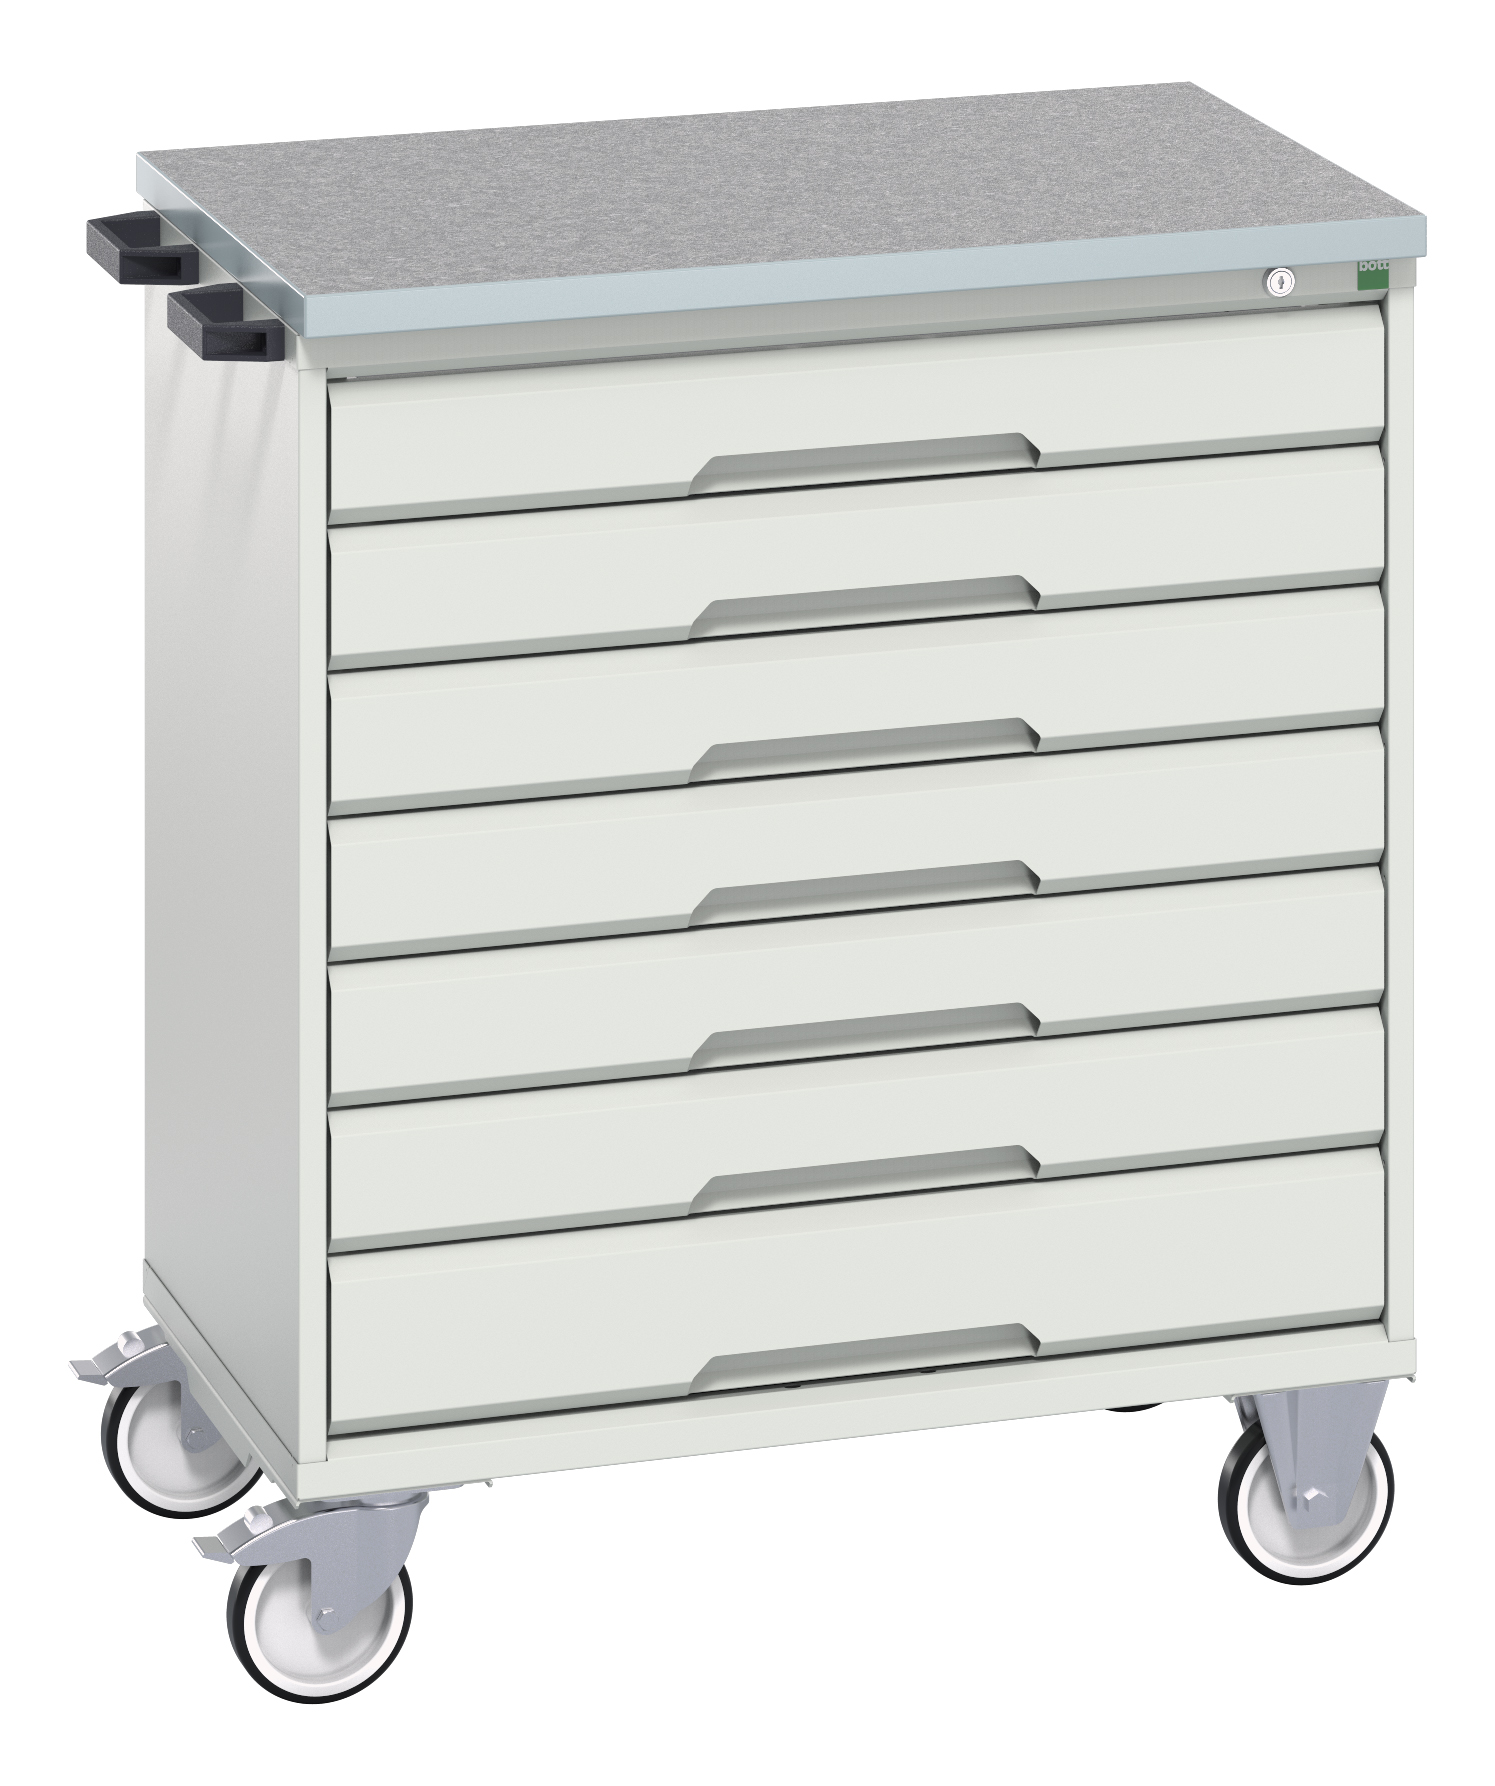 Bott Verso Mobile Drawer Cabinet With 7 Drawers & Lino Top - 16927006.16